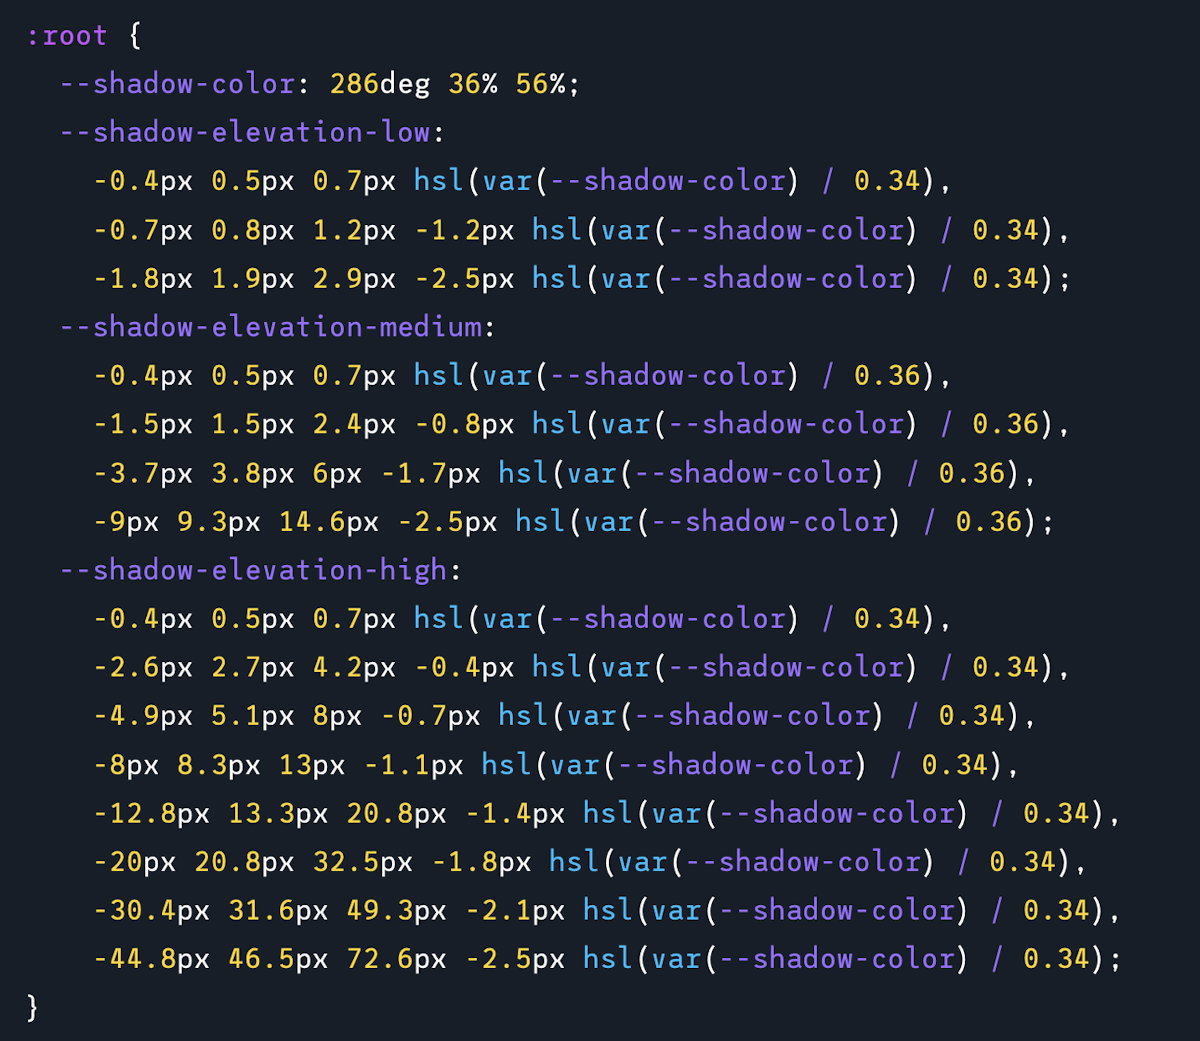 Screenshot of the code output from the above video, showing 4 declared CSS variables, fully syntax-highlighted